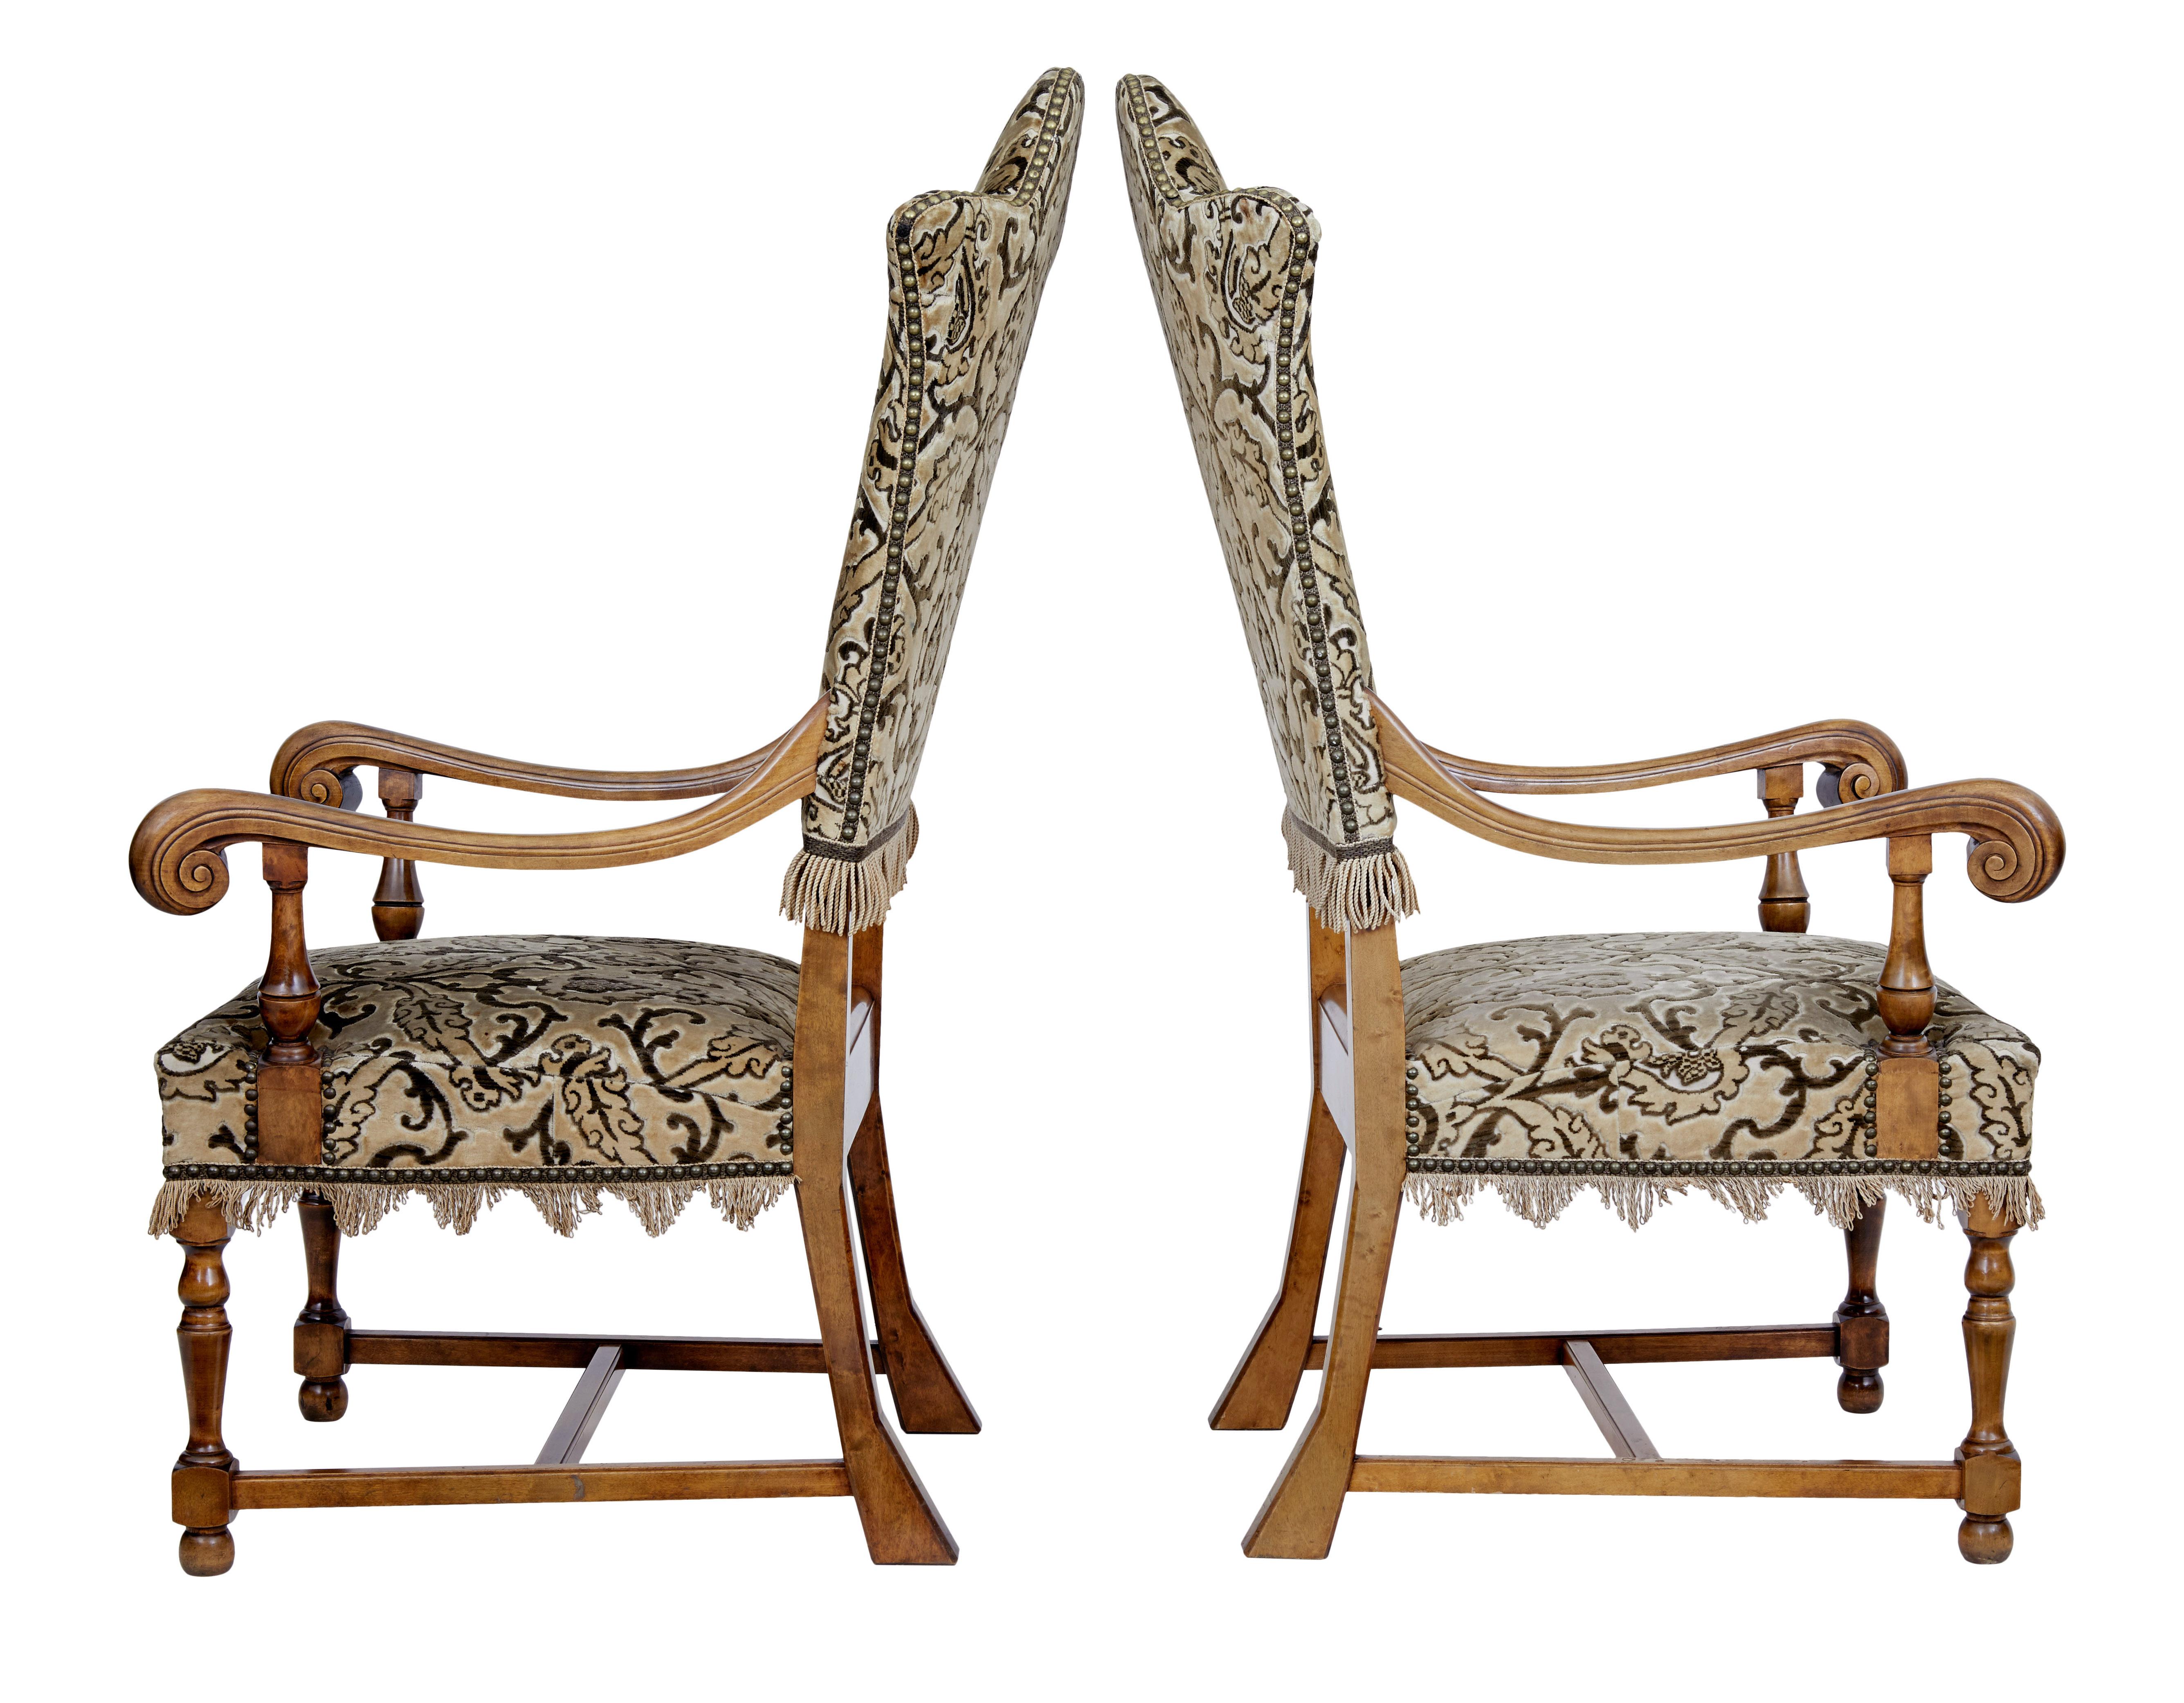 Pair of late 19th century shaped birch armchairs, circa 1890.

Elegant pair of late 19th century Swedish birch throne armchairs. A real striking pair of chairs with the shaped backs and carved scrolling arms.

Standing on front turned legs and